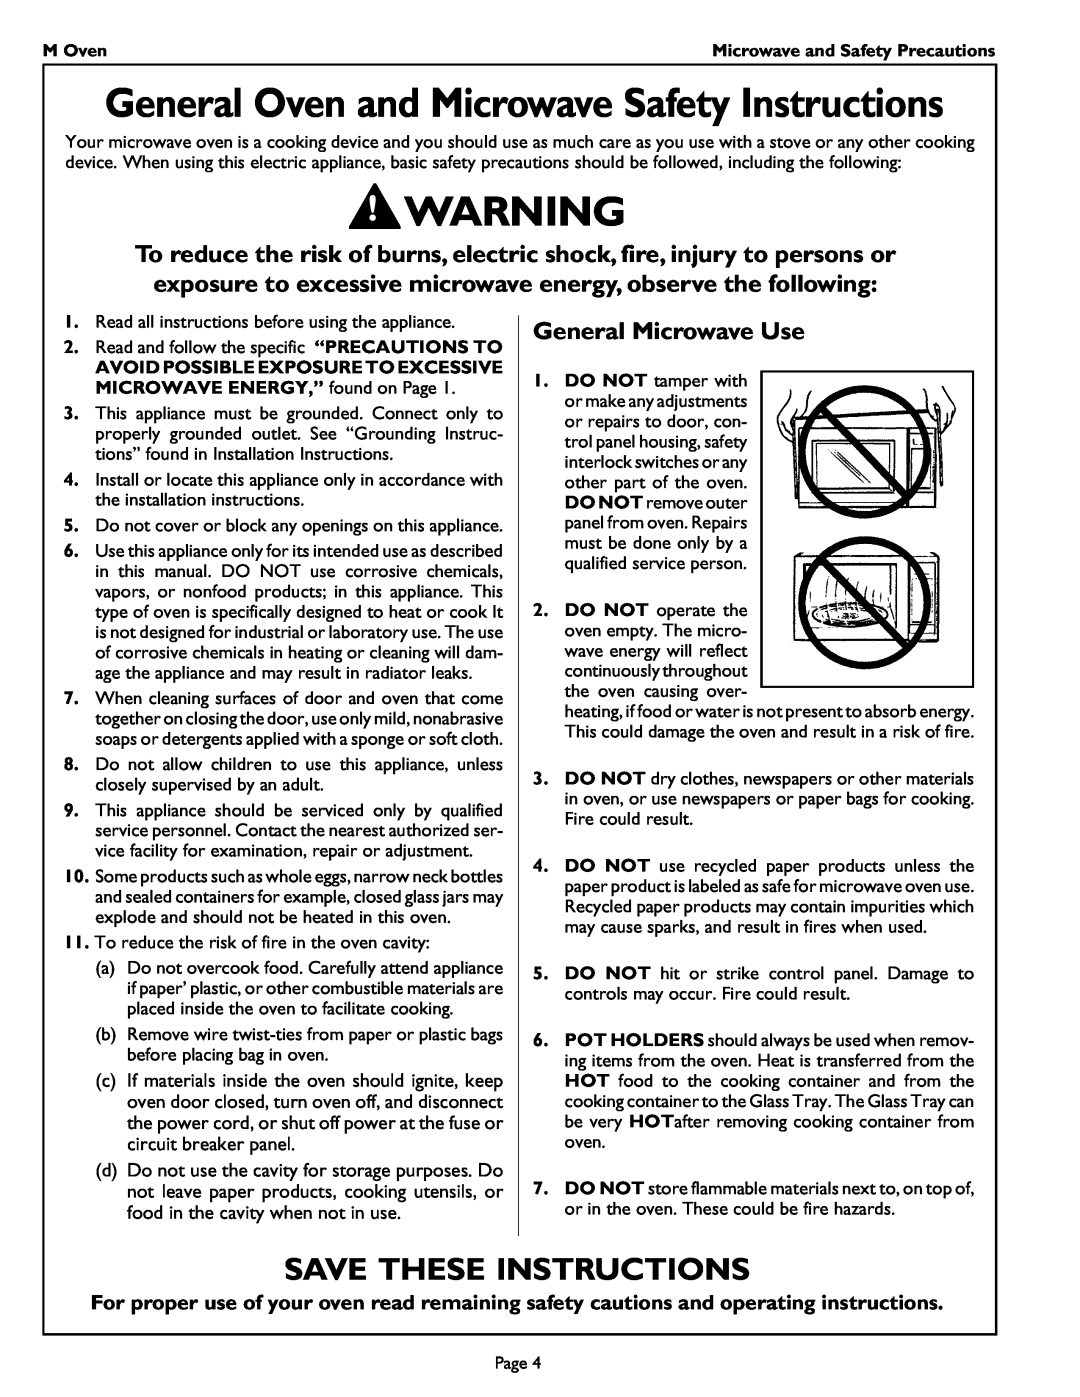 Thermador MT27 manual Save These Instructions, General Microwave Use, General Oven and Microwave Safety Instructions 